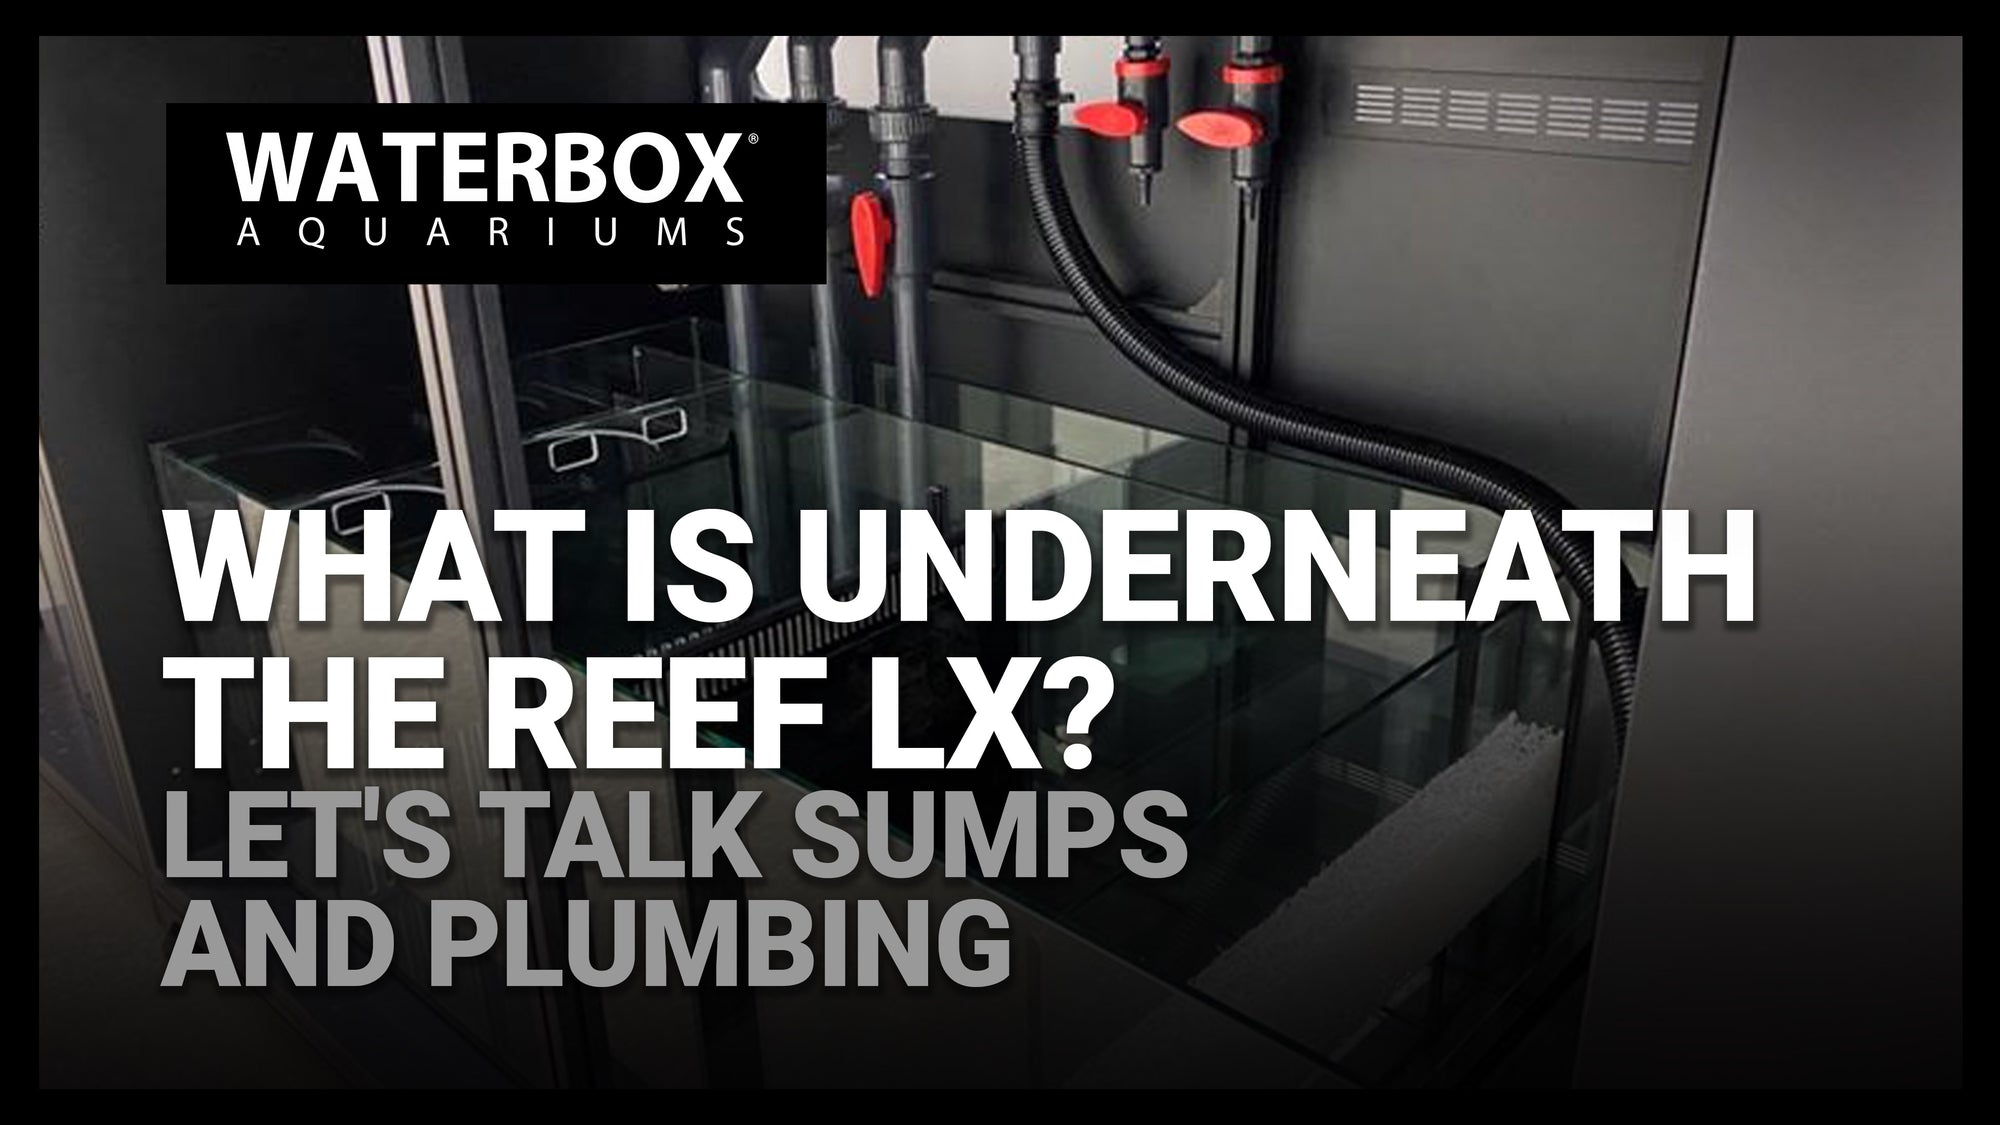 What is underneath the LX? Let's Talk Sumps and Plumbing LIVE